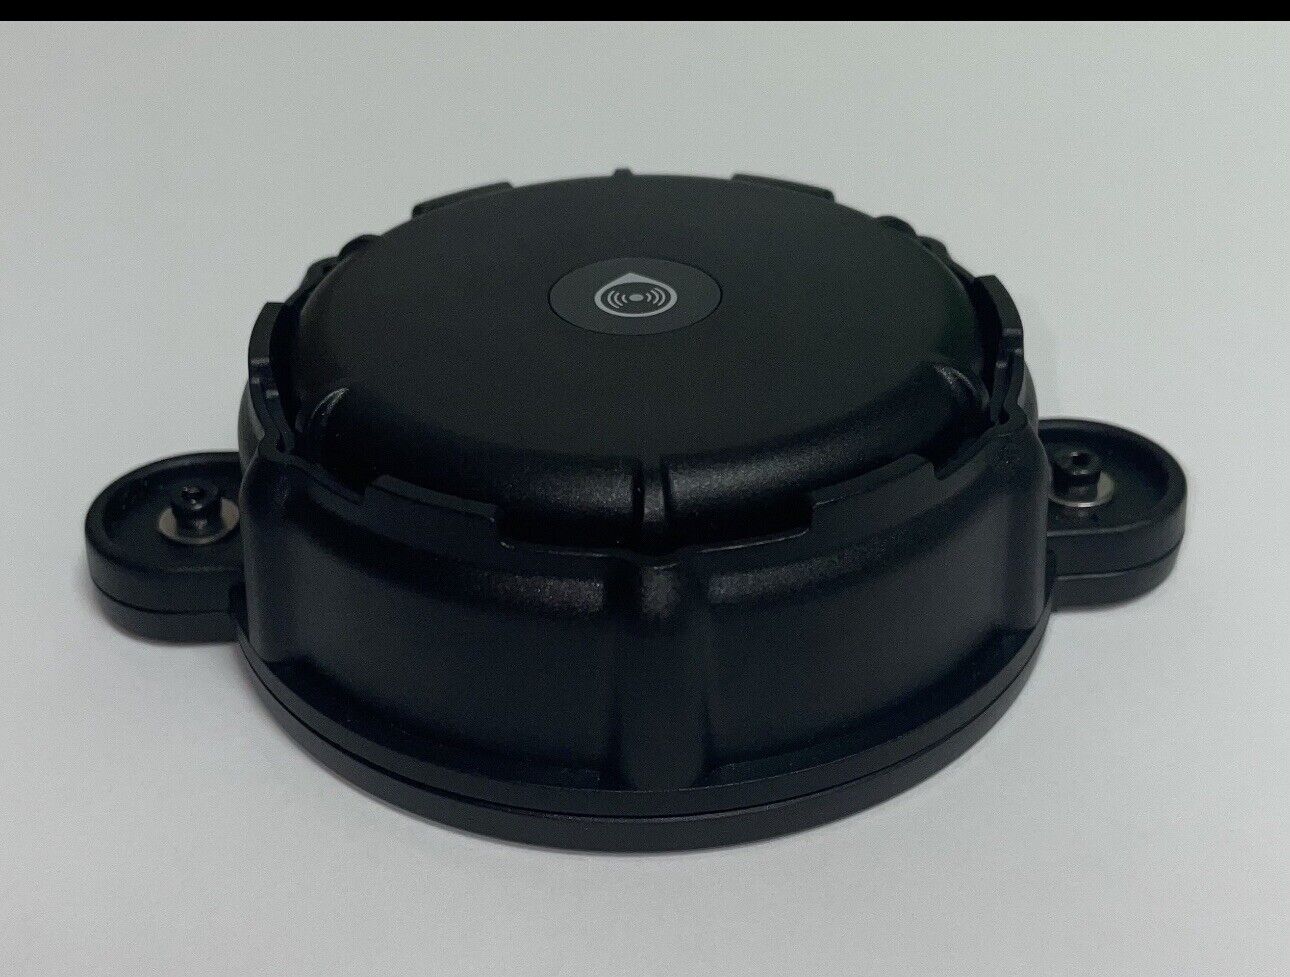 *Trailer GPS tracker-2 year battery life+SCREW MOUNT no monthly fees no contracts